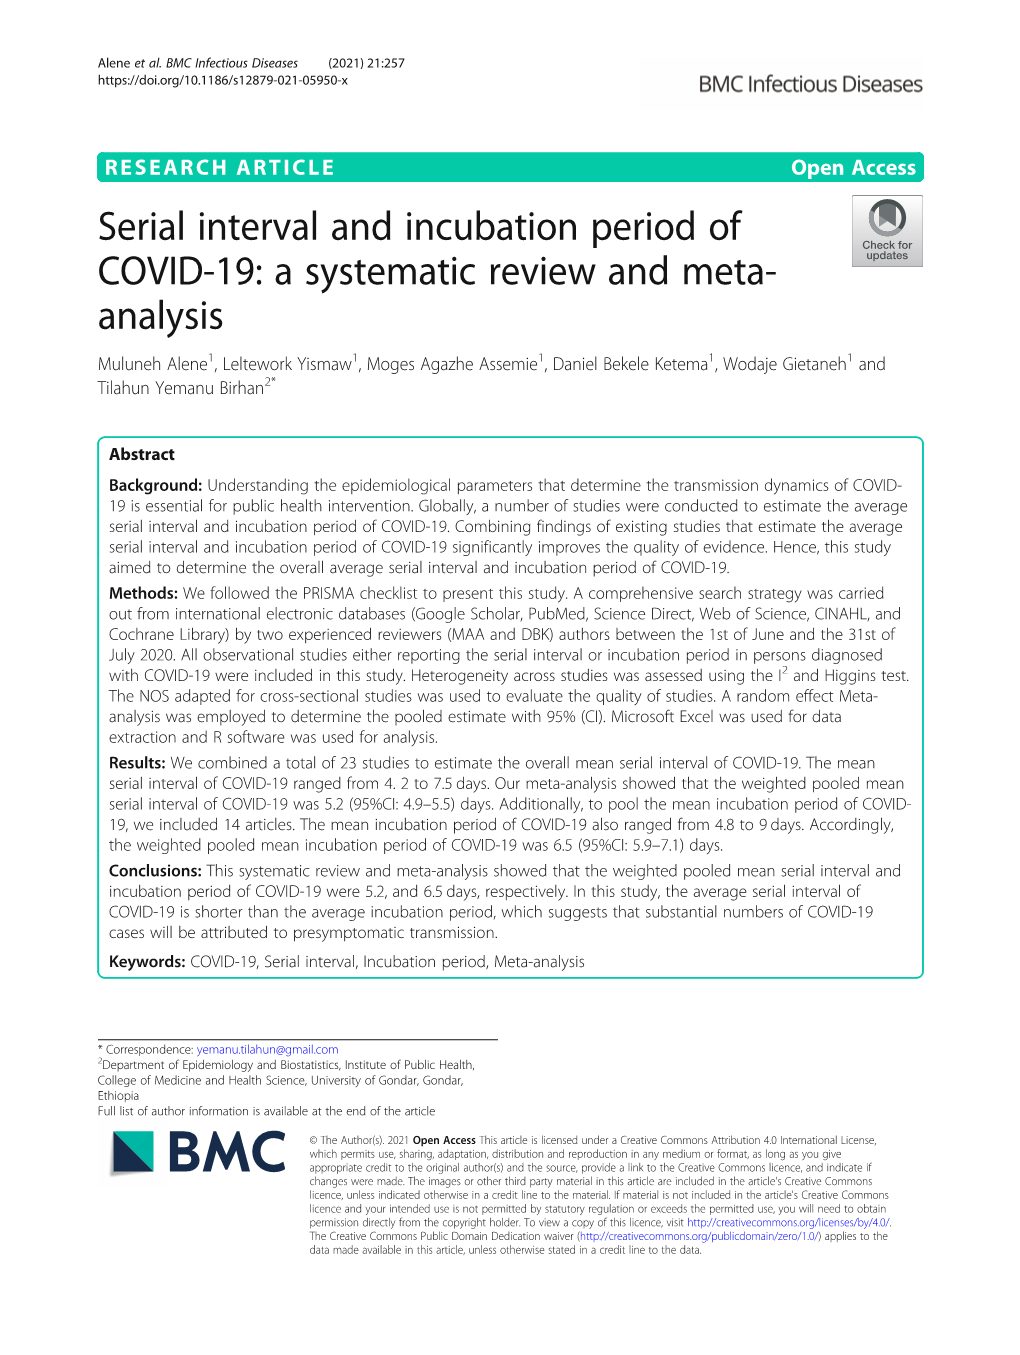 Serial Interval and Incubation Period of COVID-19